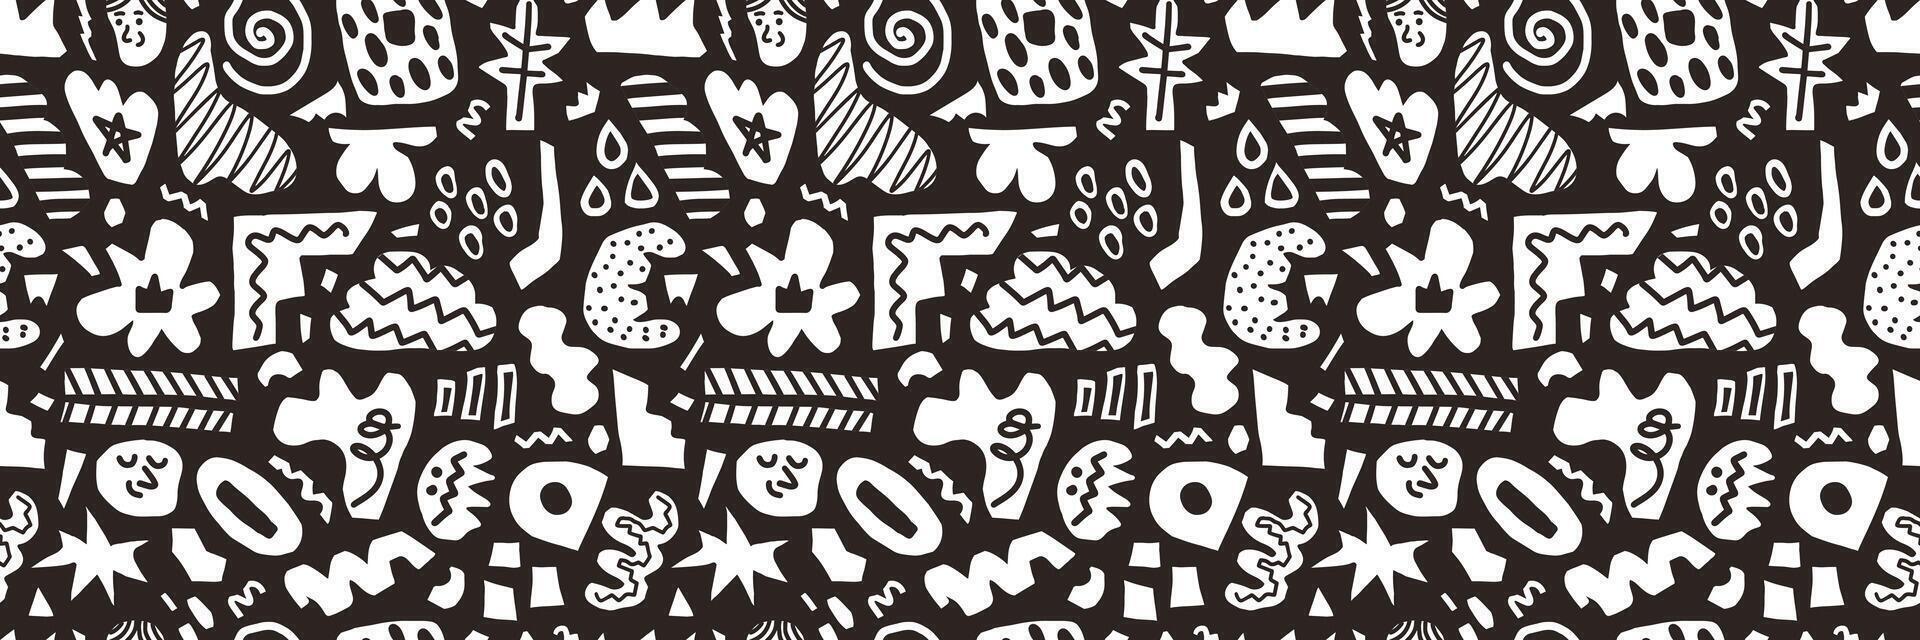 Abstract black seamless pattern hand drawn various shapes, curls, forms and doodle objects. Modern vector background